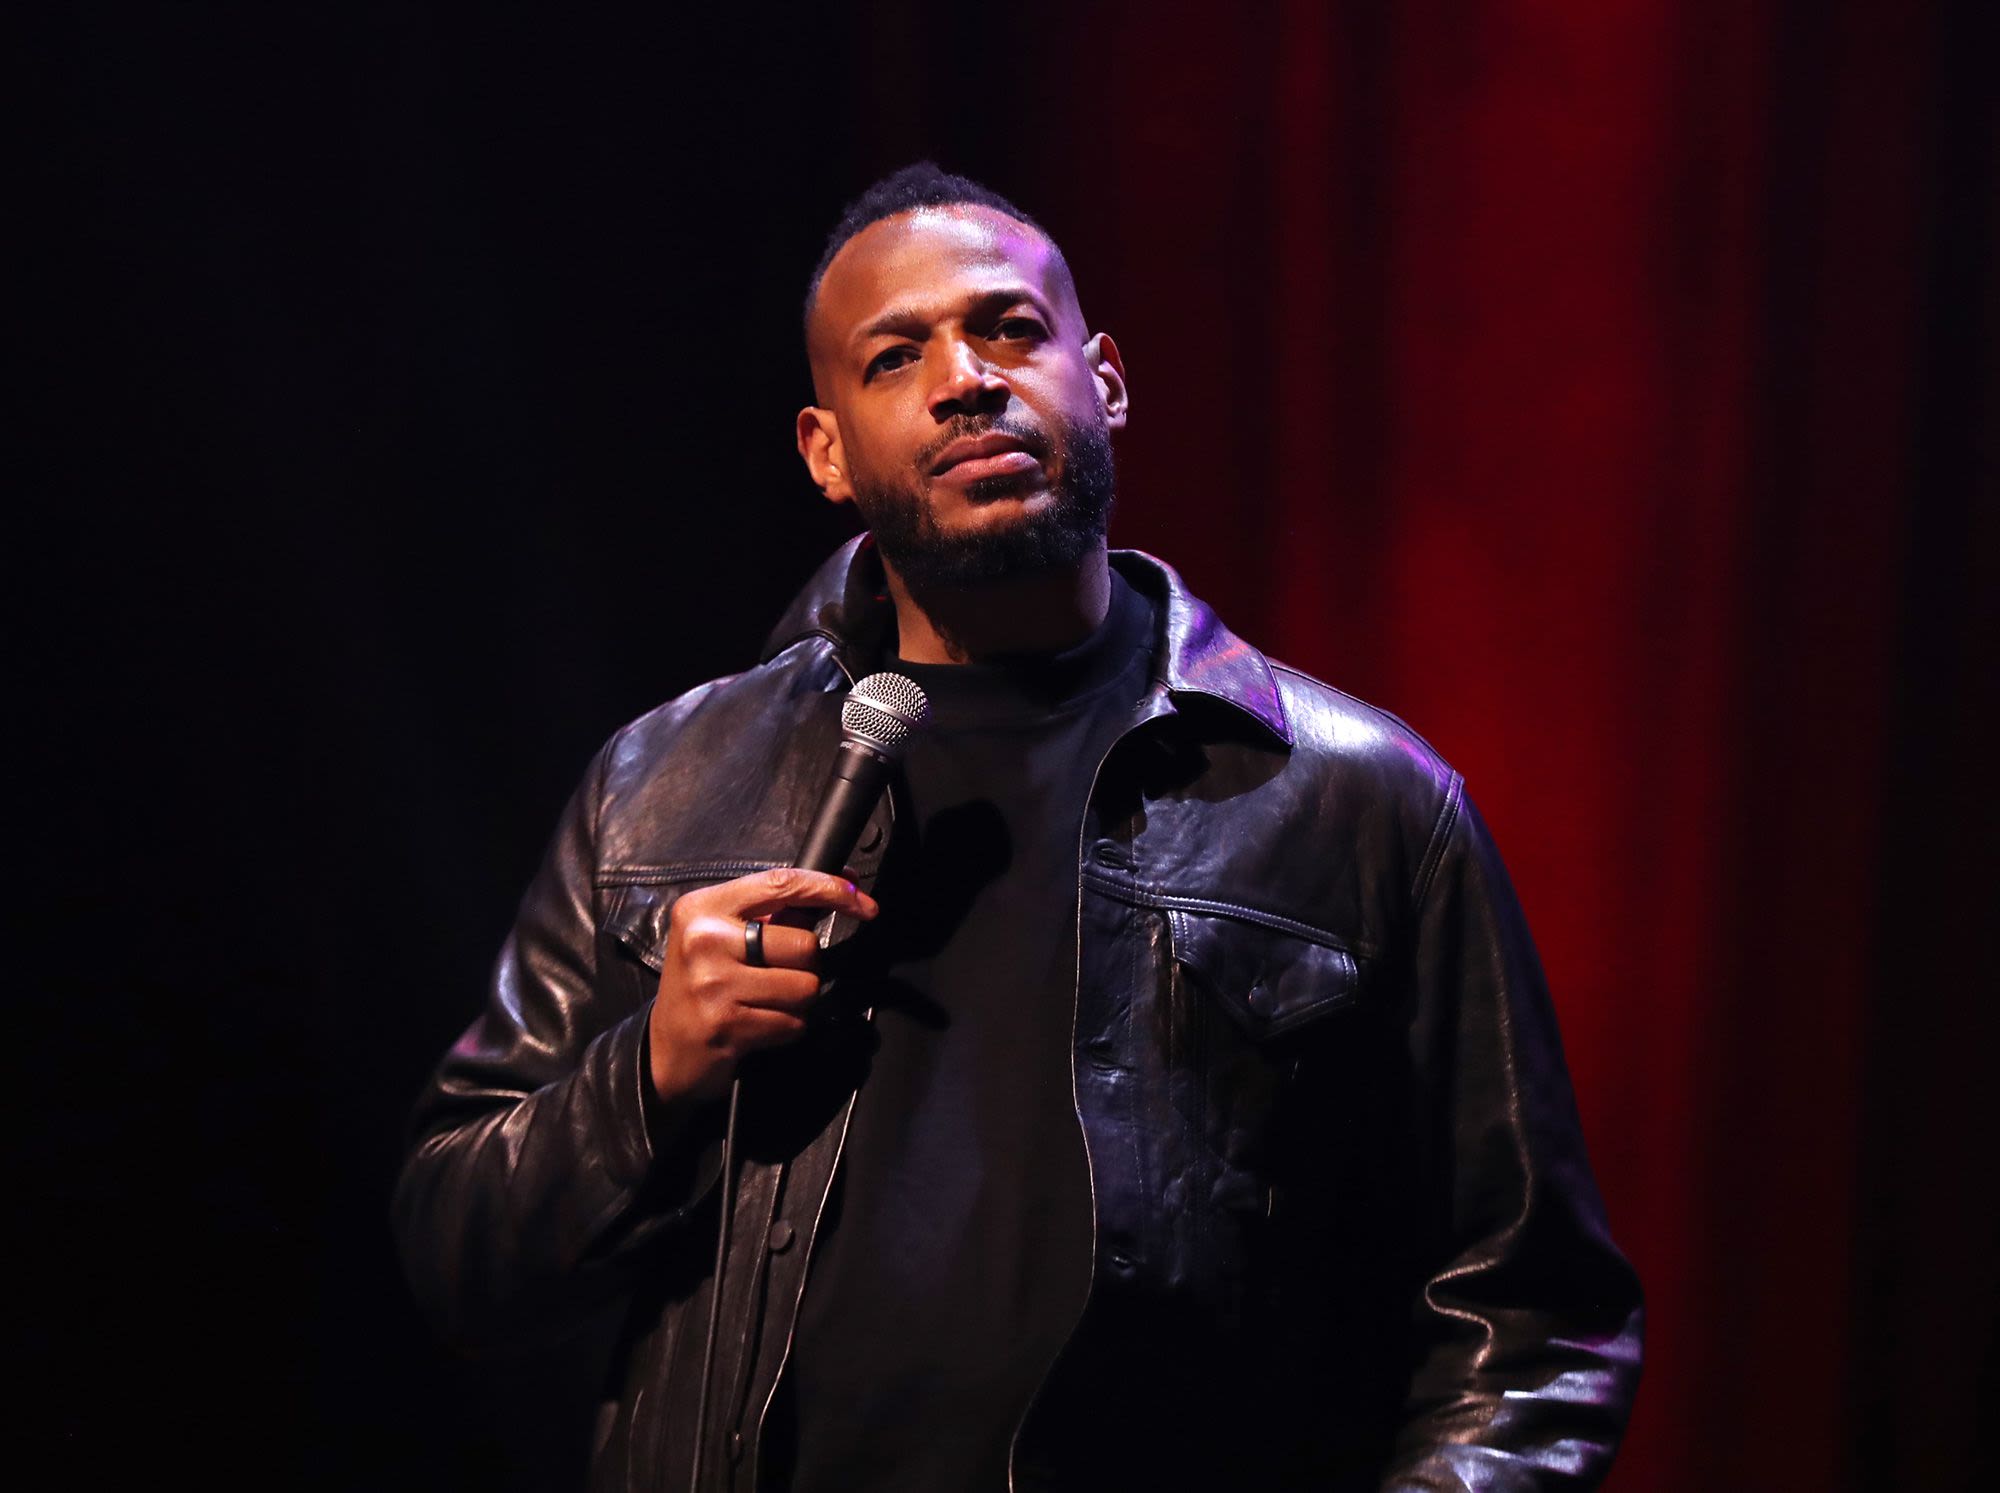 Marlon Wayans Opens Up About Losing Nearly 60 Loved Ones and His ‘Real-Life Pain’: ‘I Live Differently’